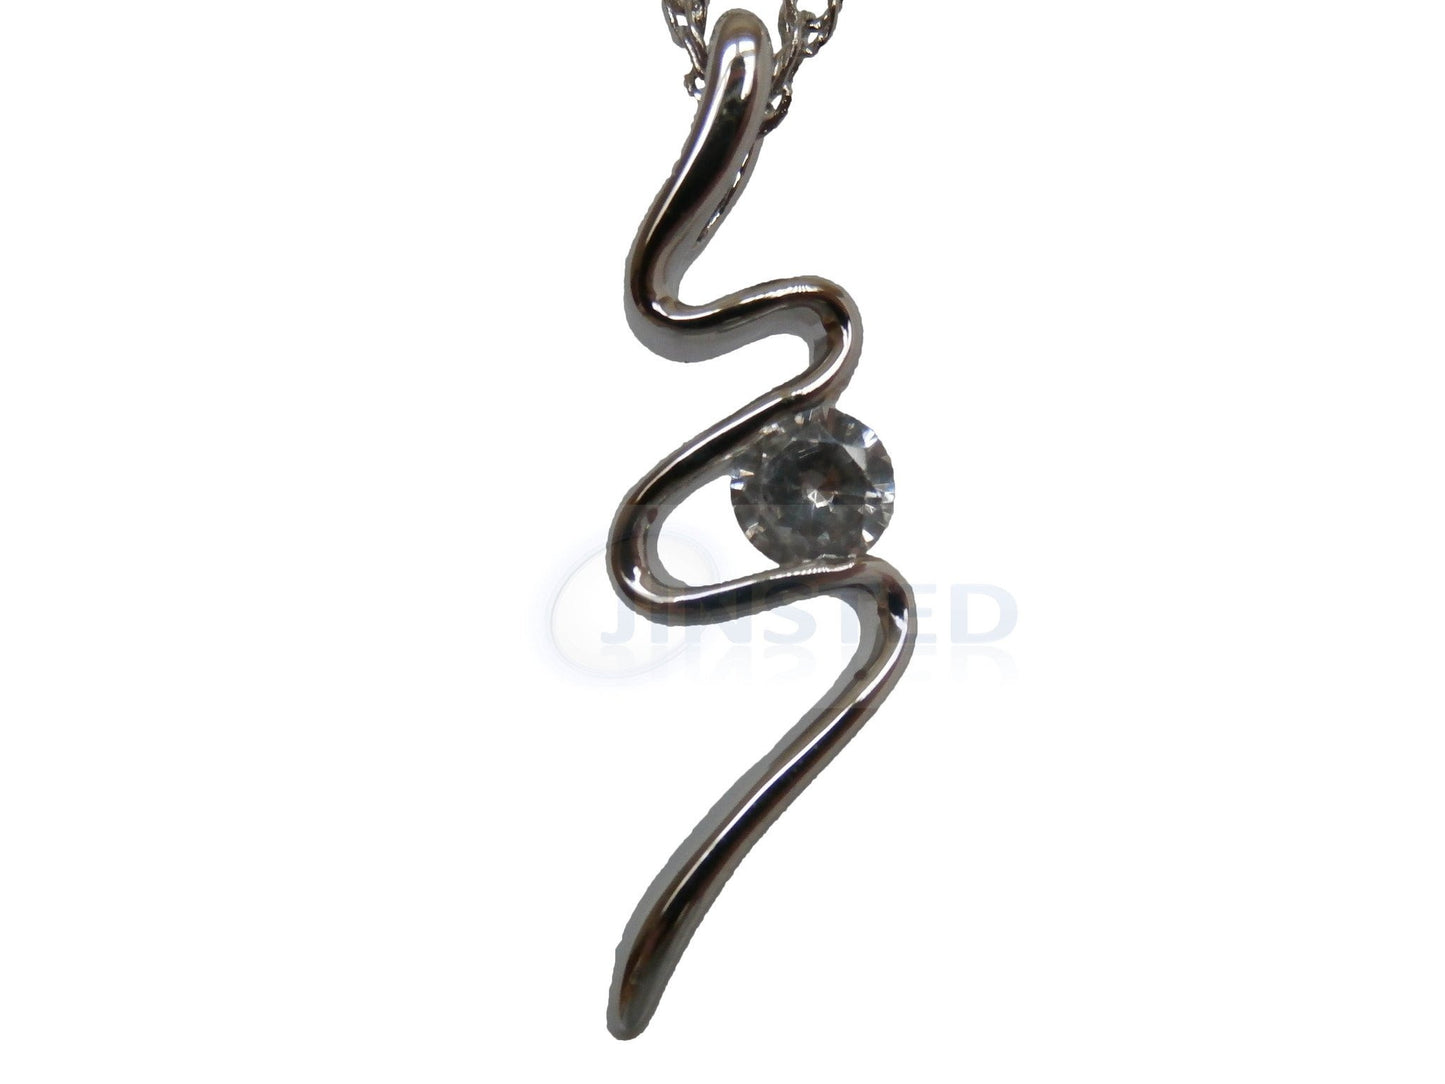 Ladies Jewellery, Silver Necklace with Snake Pendant with White Gem, Jinsted